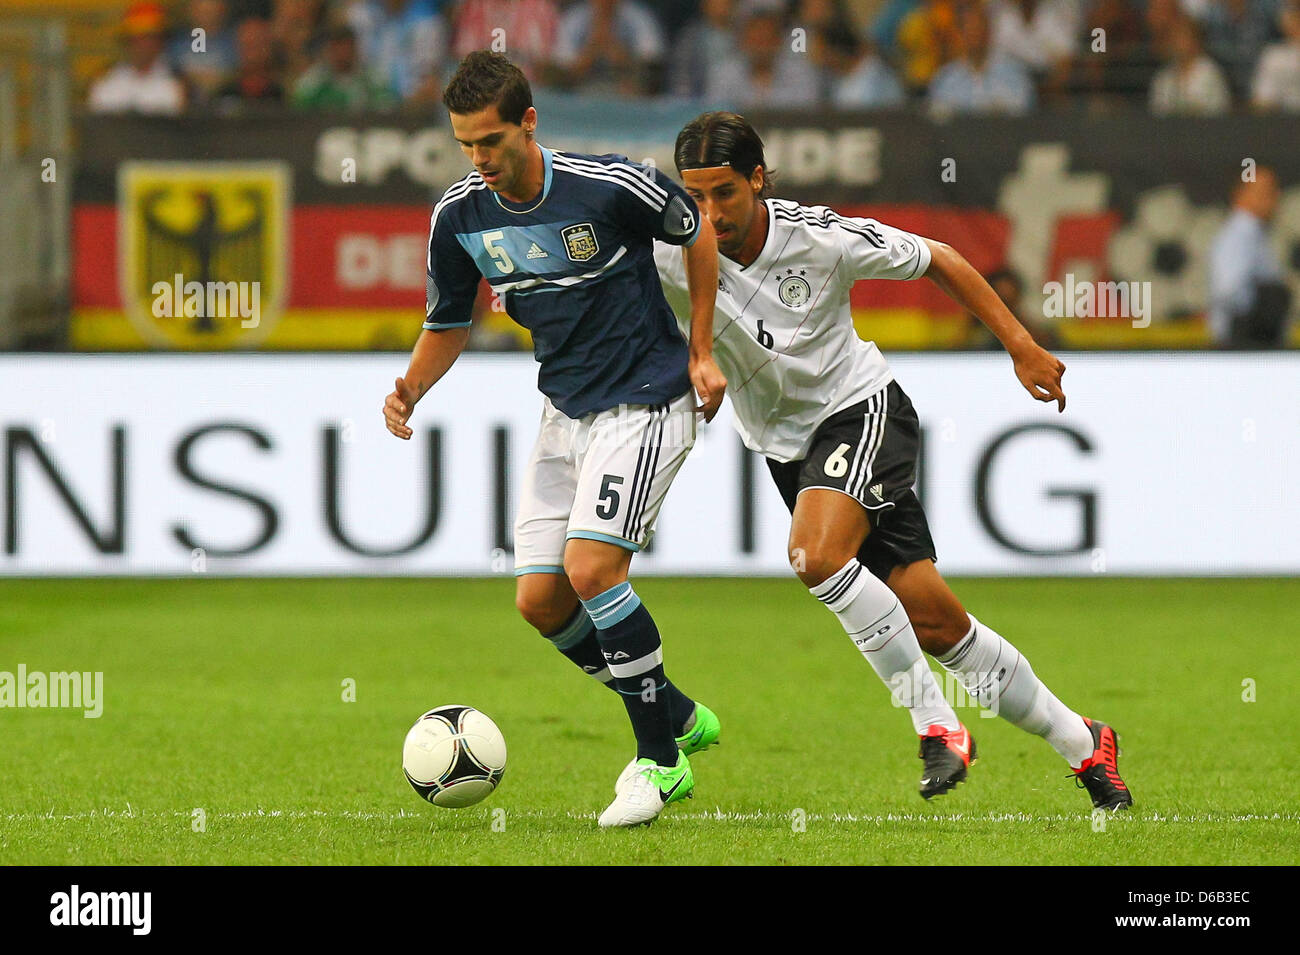 Germany's Sami Khedira (R) vies for the ball with Argentina's Fernando Gago  during the friendly soccer match between Germany and Argentina at the Commerzbank-Arena in Frankfurt/Main, Germany, 15 August 2012. Photo: Revierfoto Stock Photo